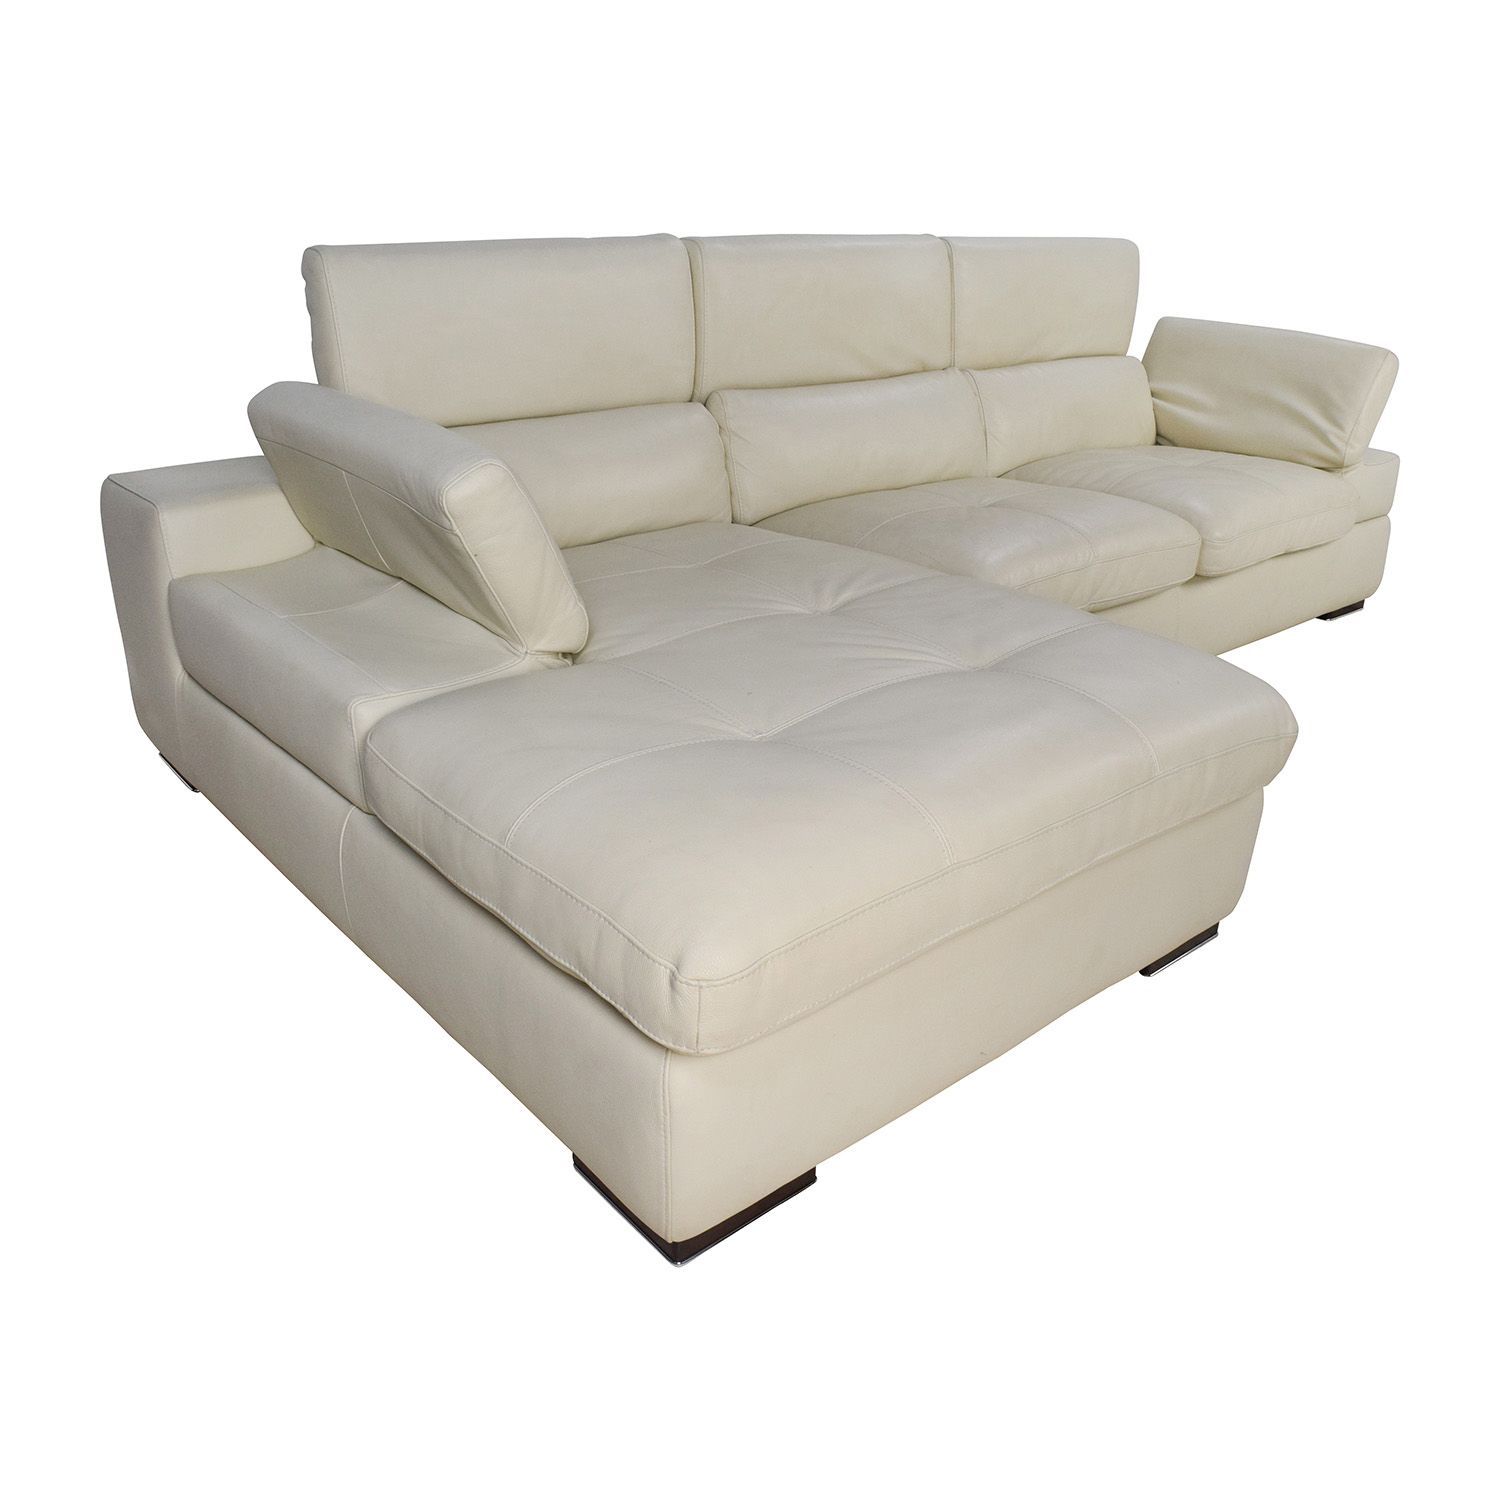 69% Off – L Shaped Cream Leather Sectional Sofa / Sofas With Owego L Shaped Sectional Sofas (View 14 of 15)